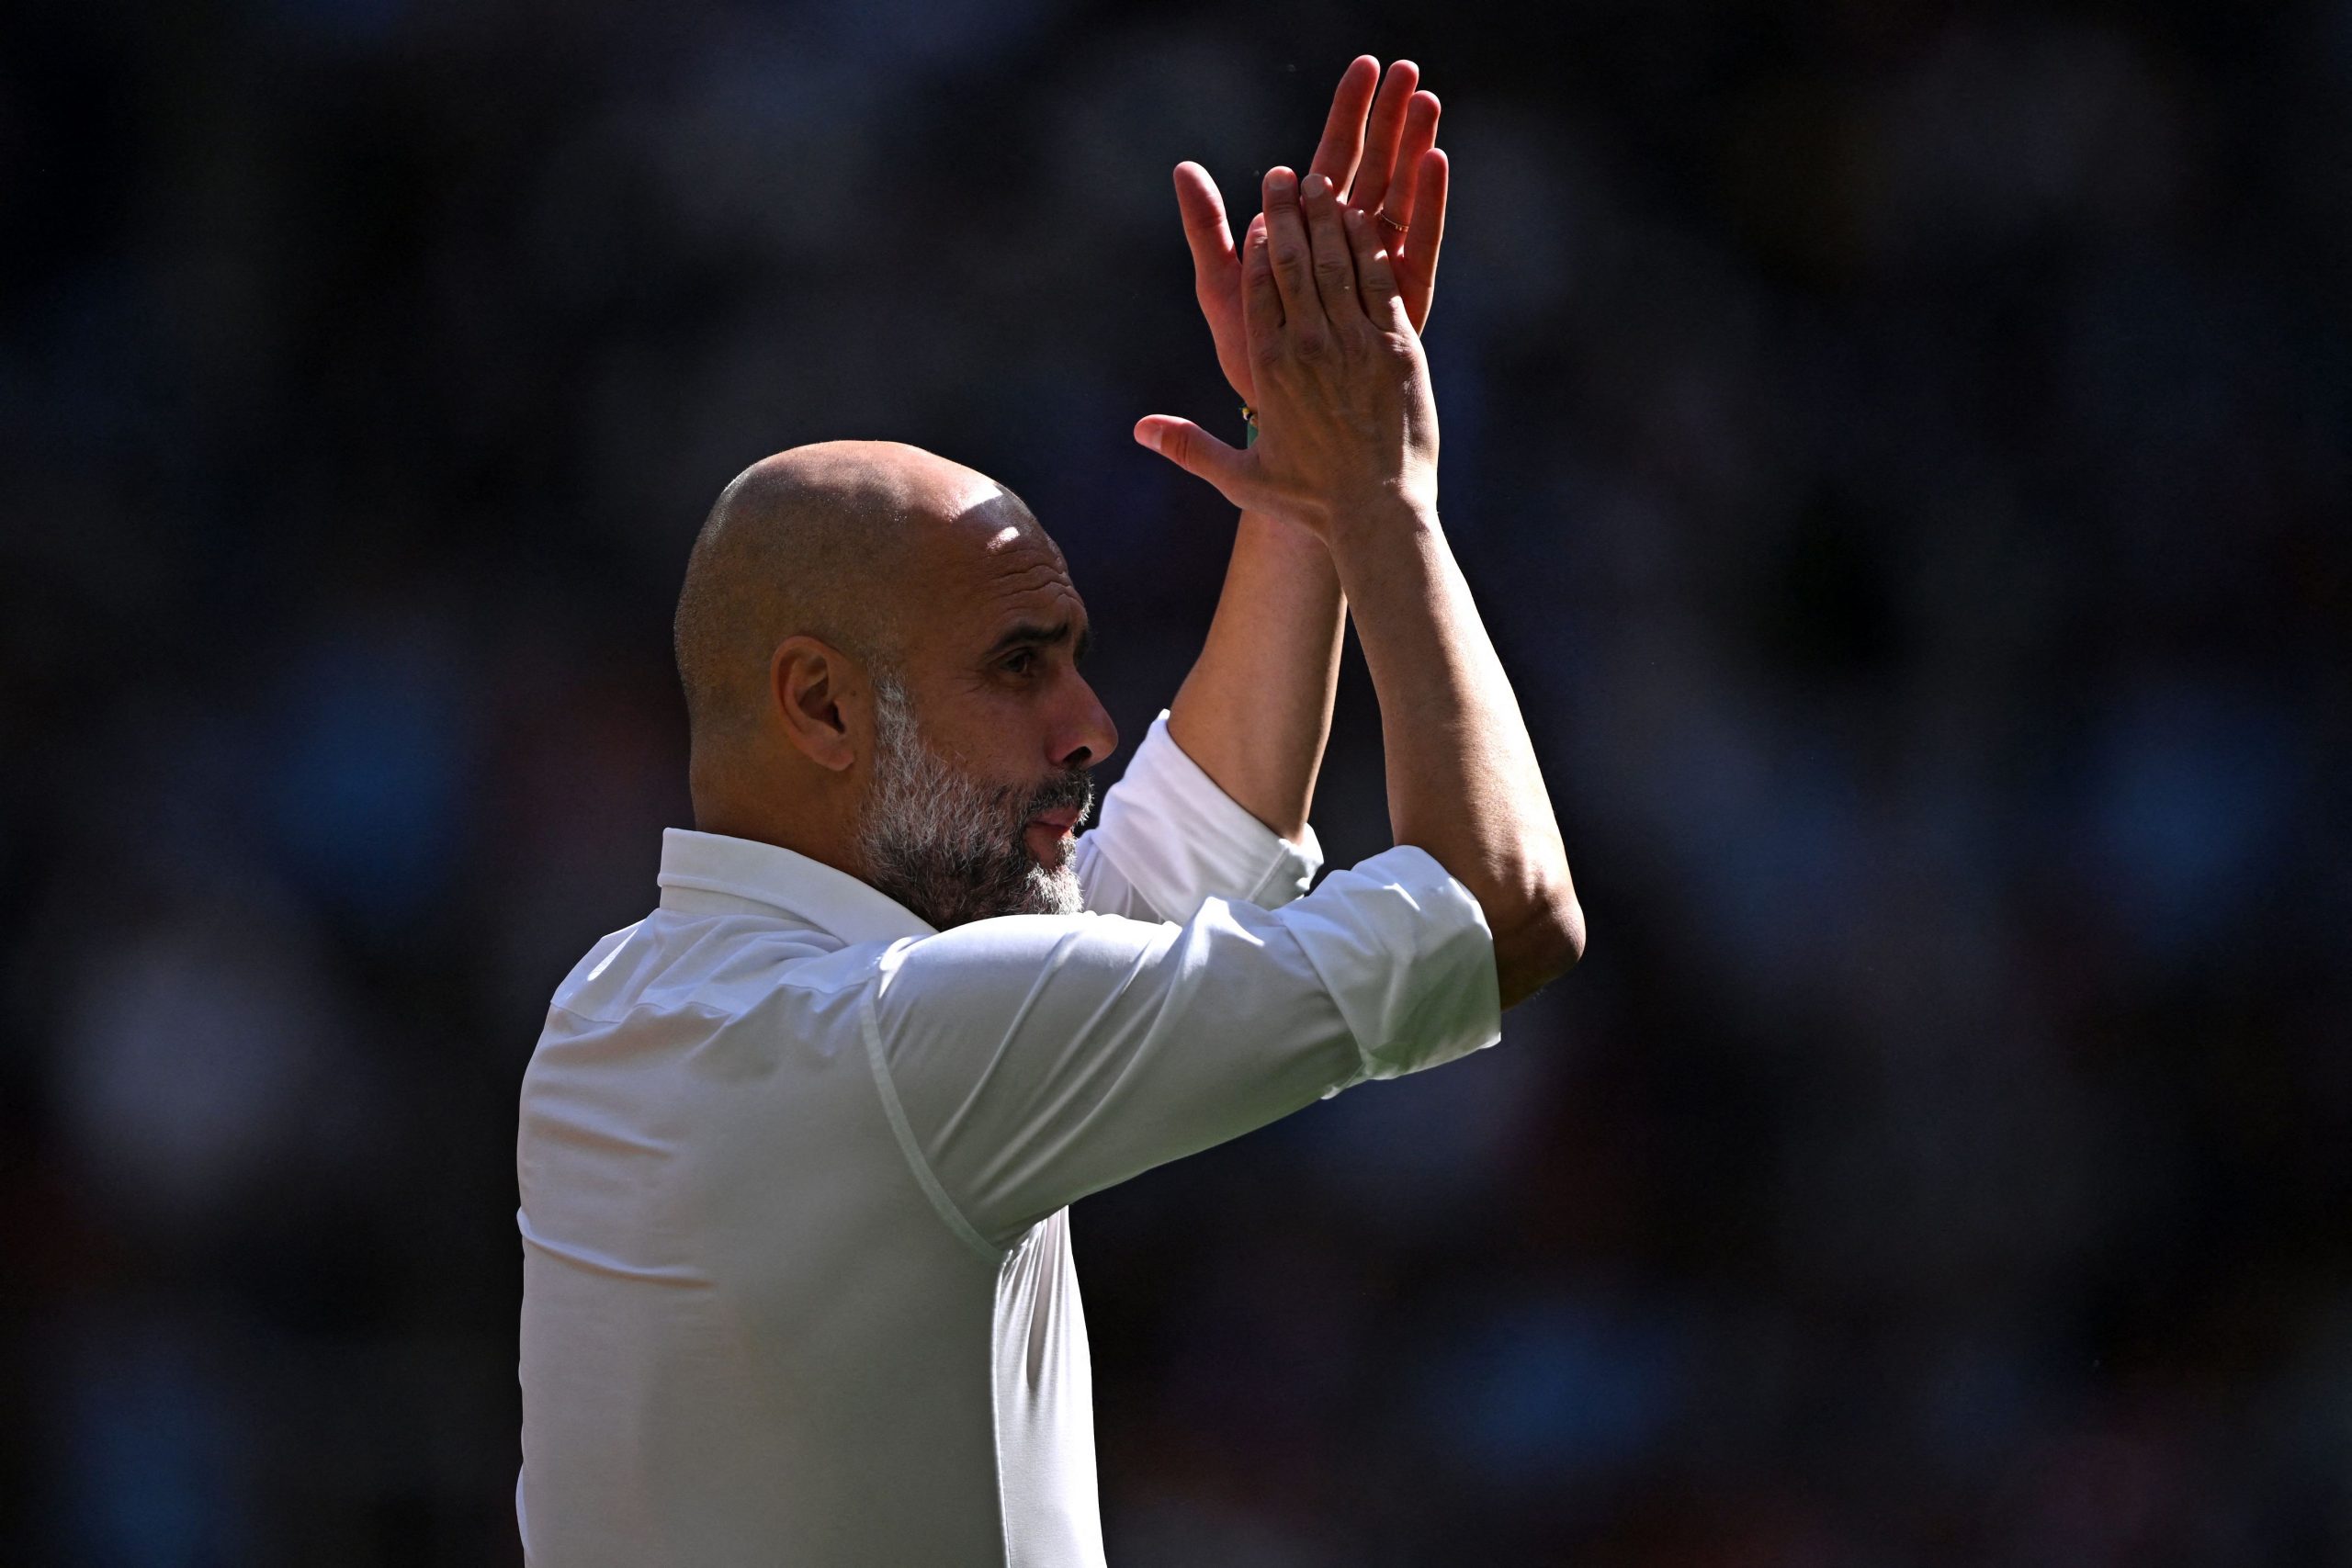 Manchester City's Spanish manager Pep Guardiola applauds ahead of kick-off in the English FA Community Shield football match between Arsenal and Manchester City at Wembley Stadium, in London, August 6, 2023. (Photo by JUSTIN TALLIS / AFP) / NOT FOR MARKETING OR ADVERTISING USE / RESTRICTED TO EDITORIAL USE (Photo by JUSTIN TALLIS/AFP via Getty Images)